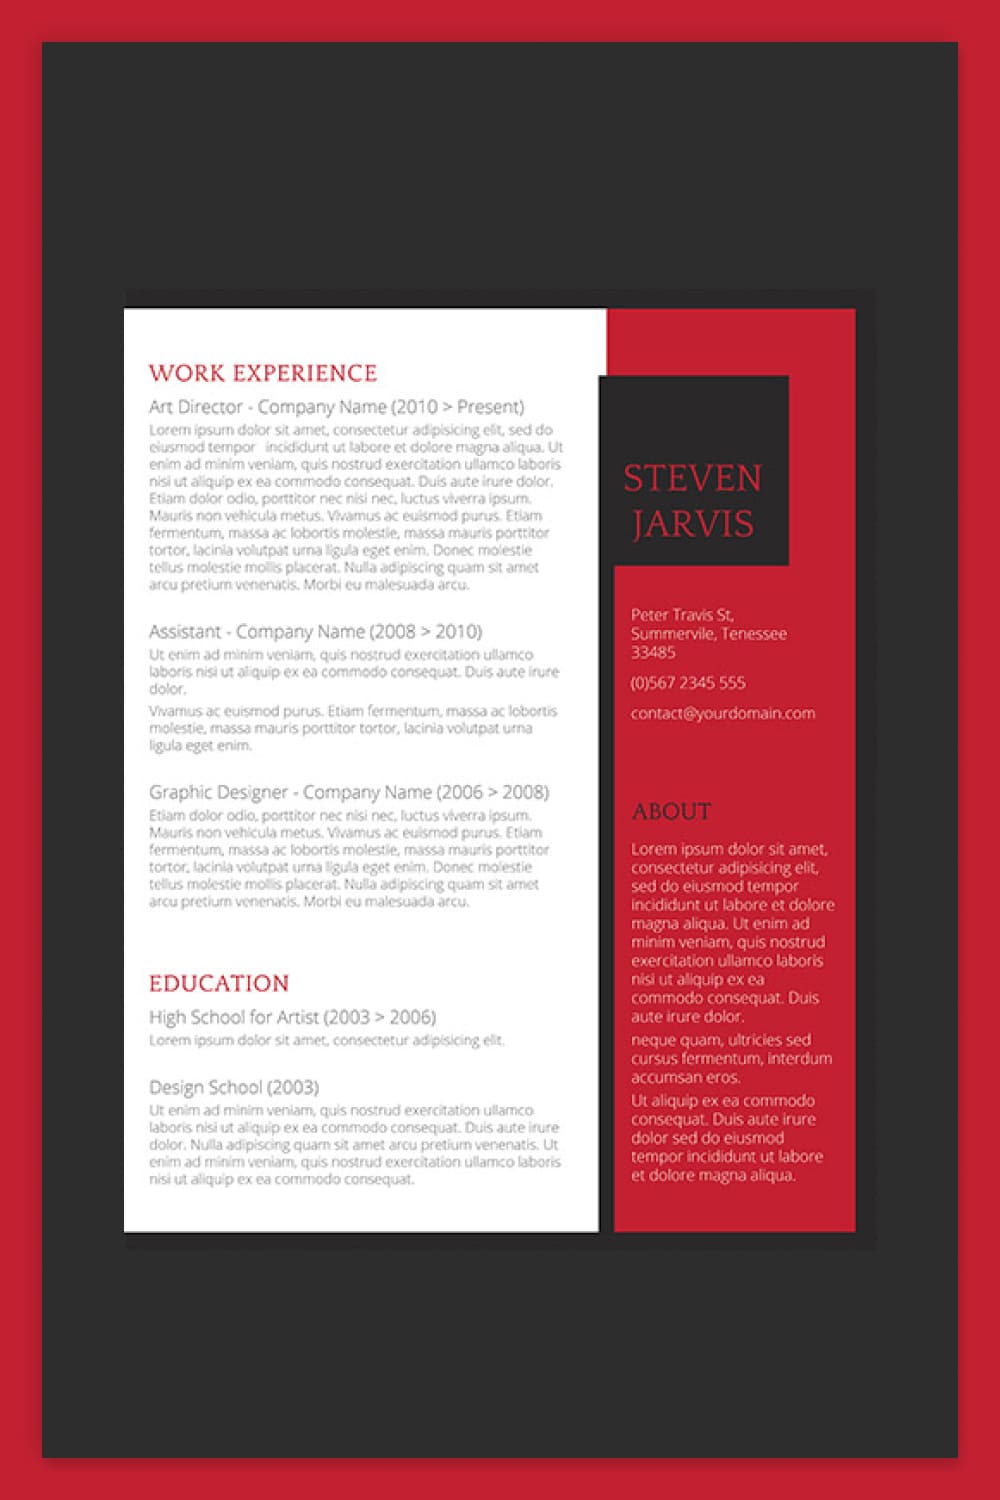 Resume with white text with red and black insert.